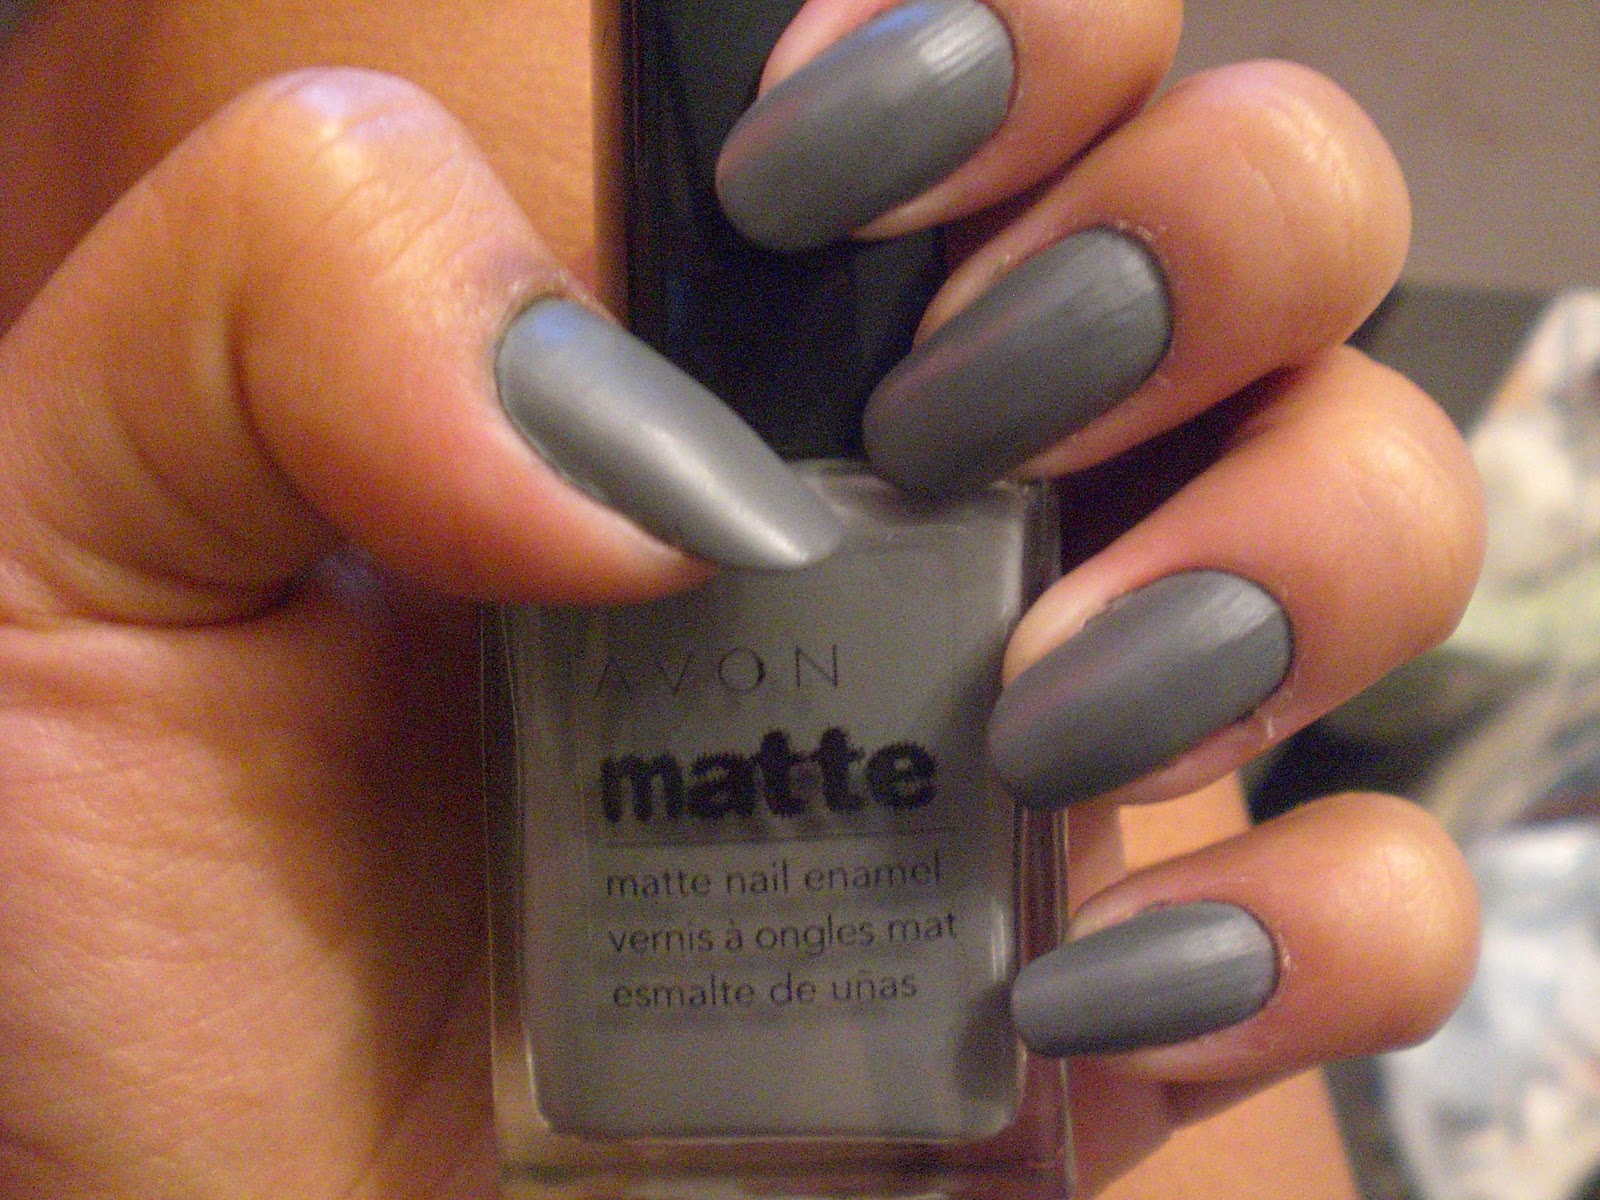 10. "Winter Beauty: The Best Matte Nail Colors" - wide 7